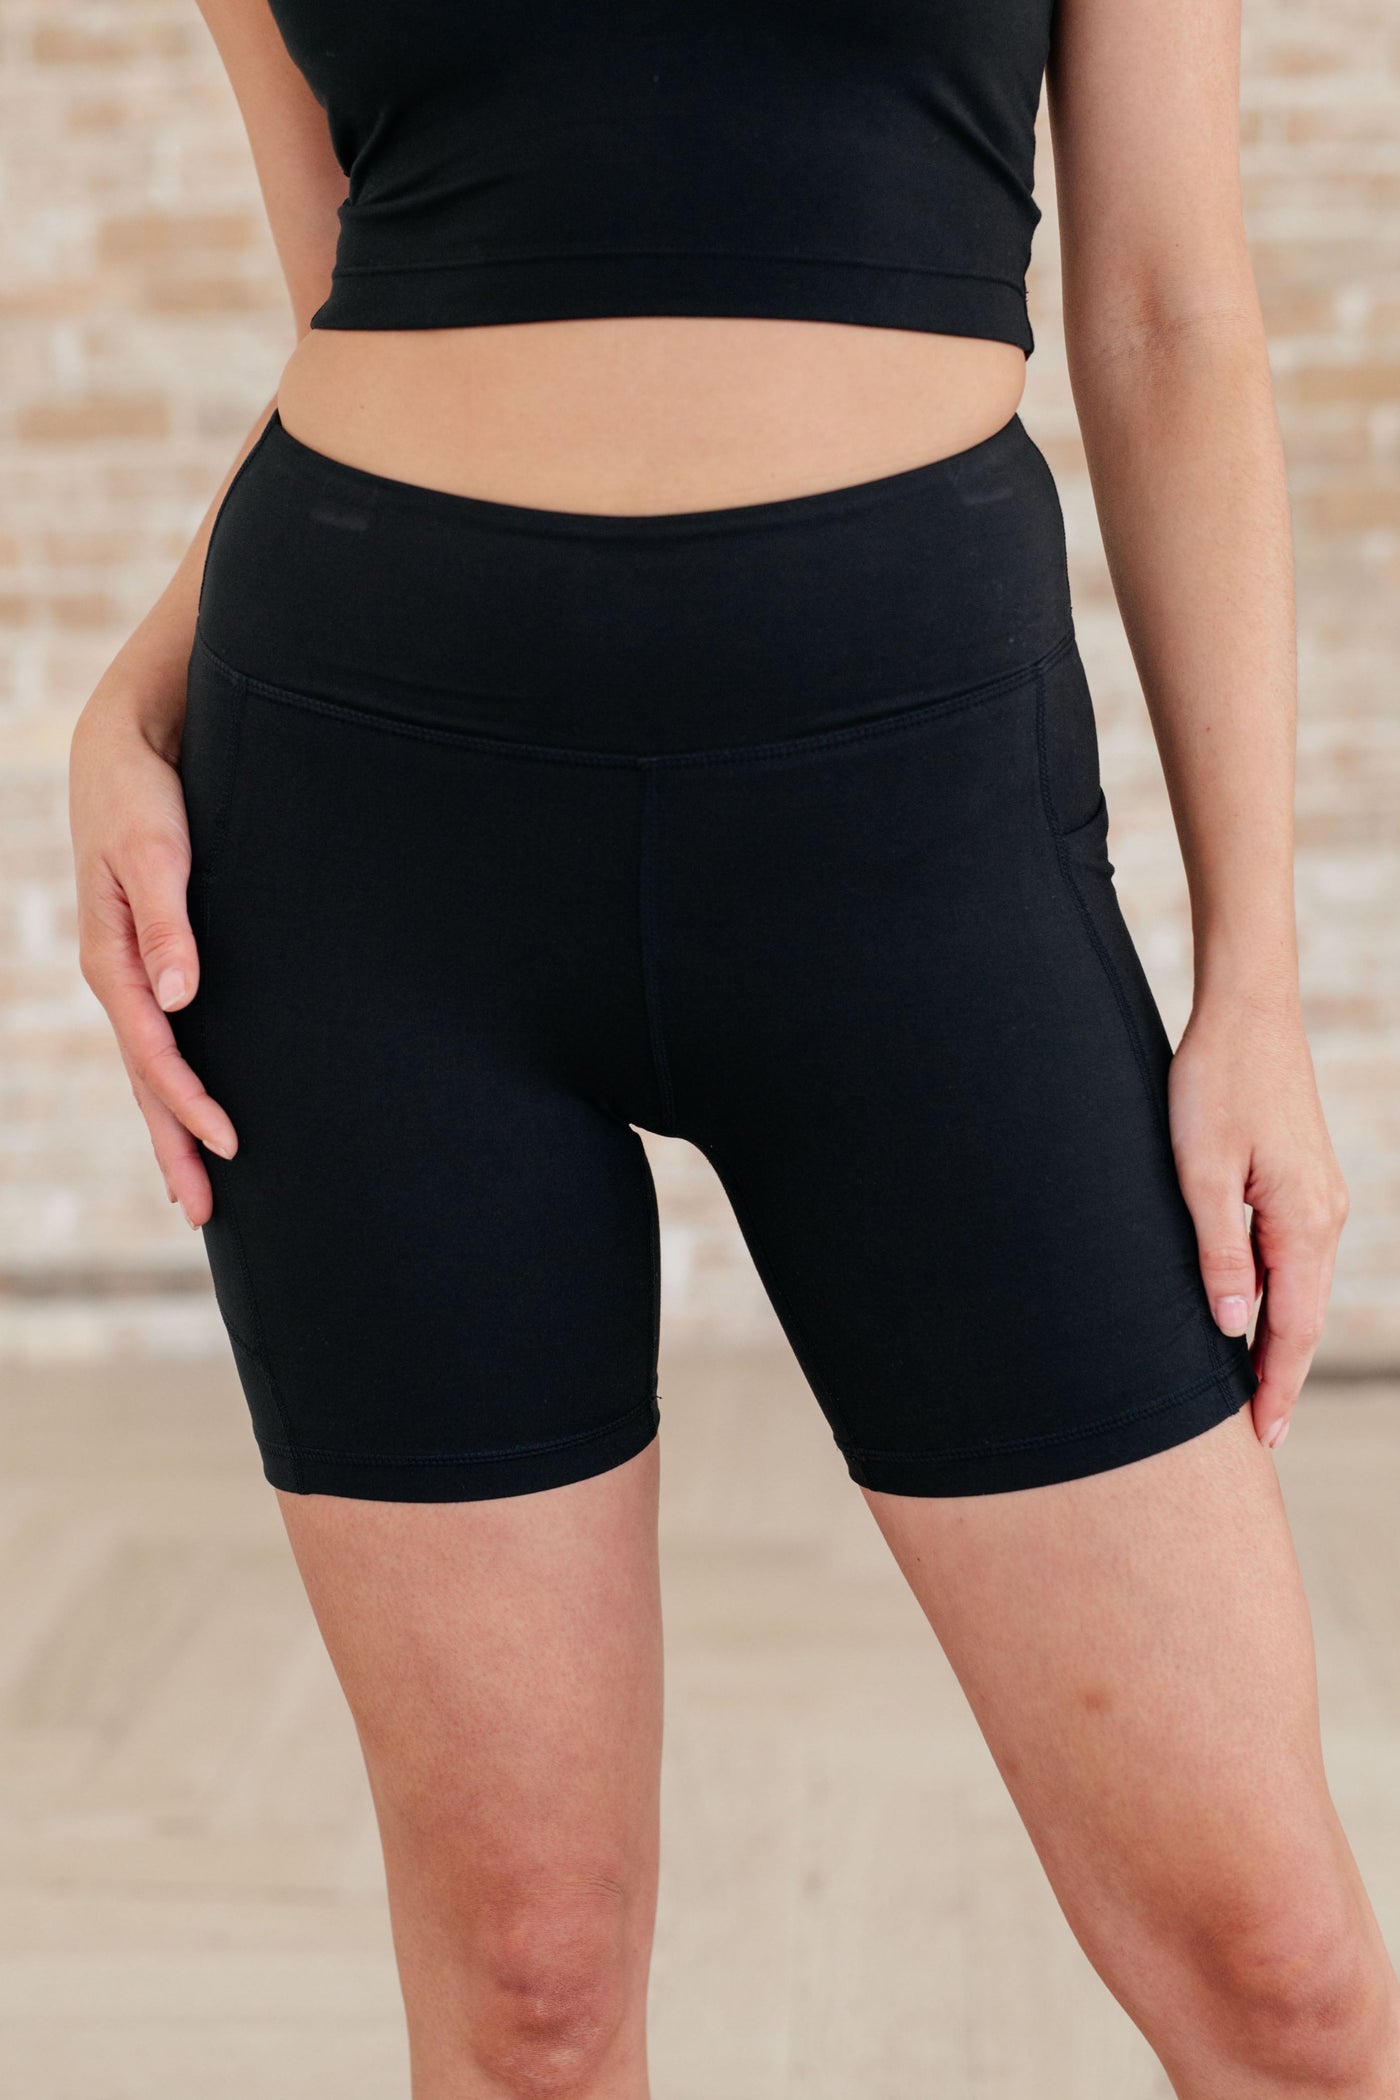 Getting Active Biker Shorts in Black-Athleisure-Ave Shops-Market Street Nest, Fashionable Clothing, Shoes and Home Décor Located in Mabank, TX